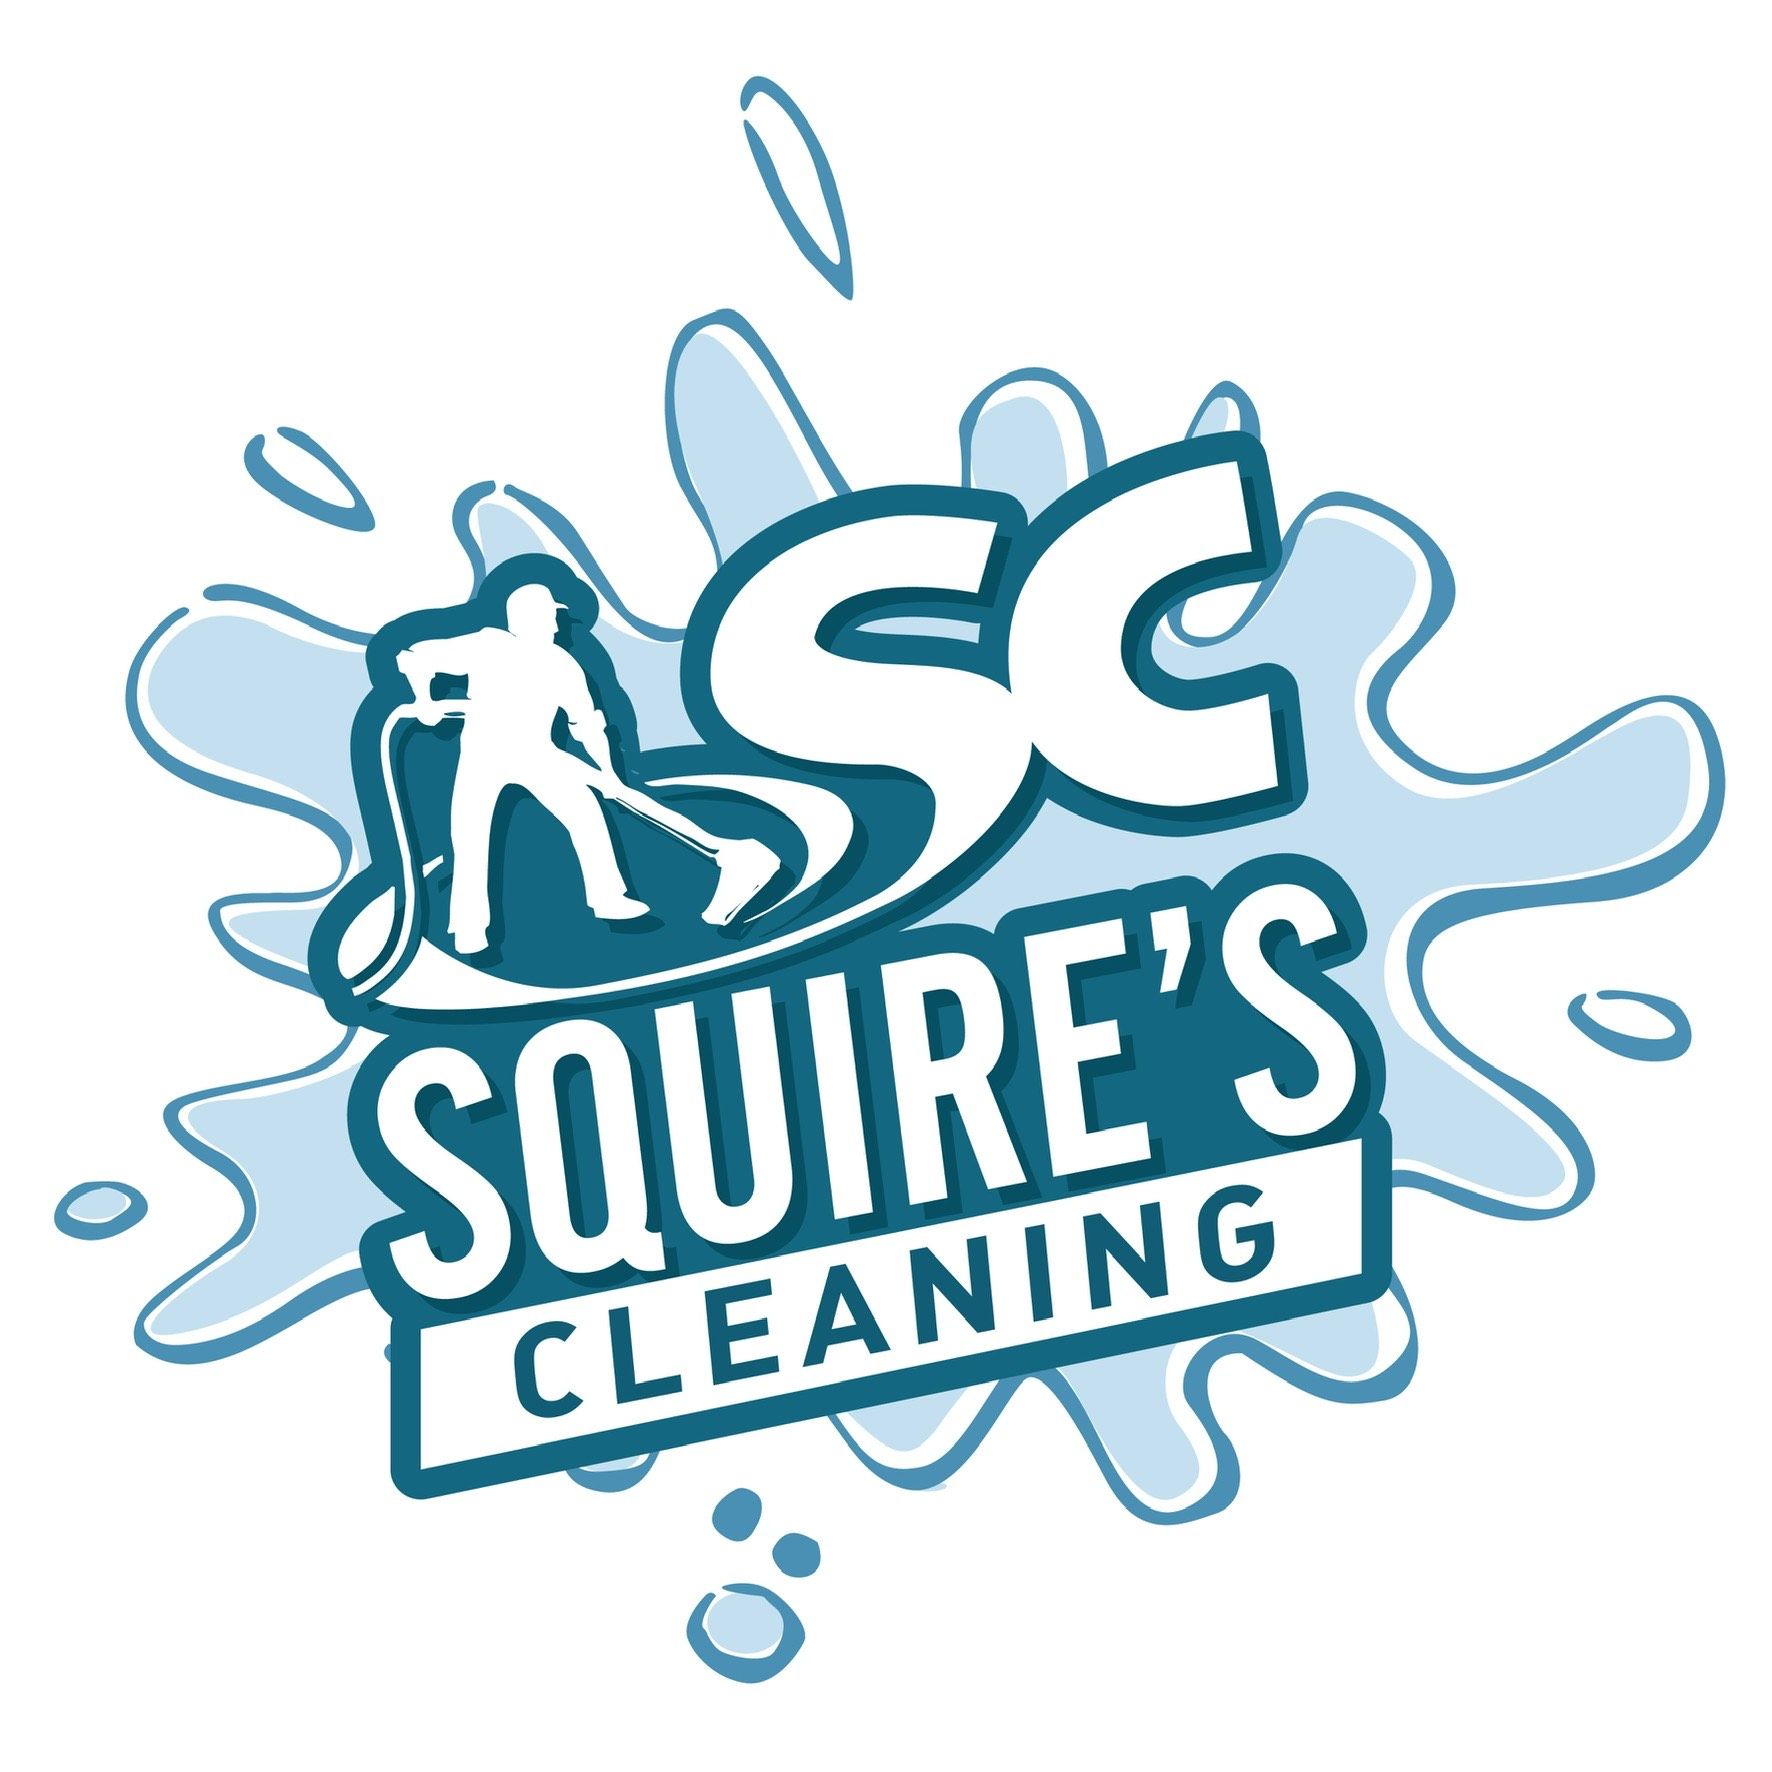 Carpet Cleaning Service in Morrisville, NC | Squires Cleaning